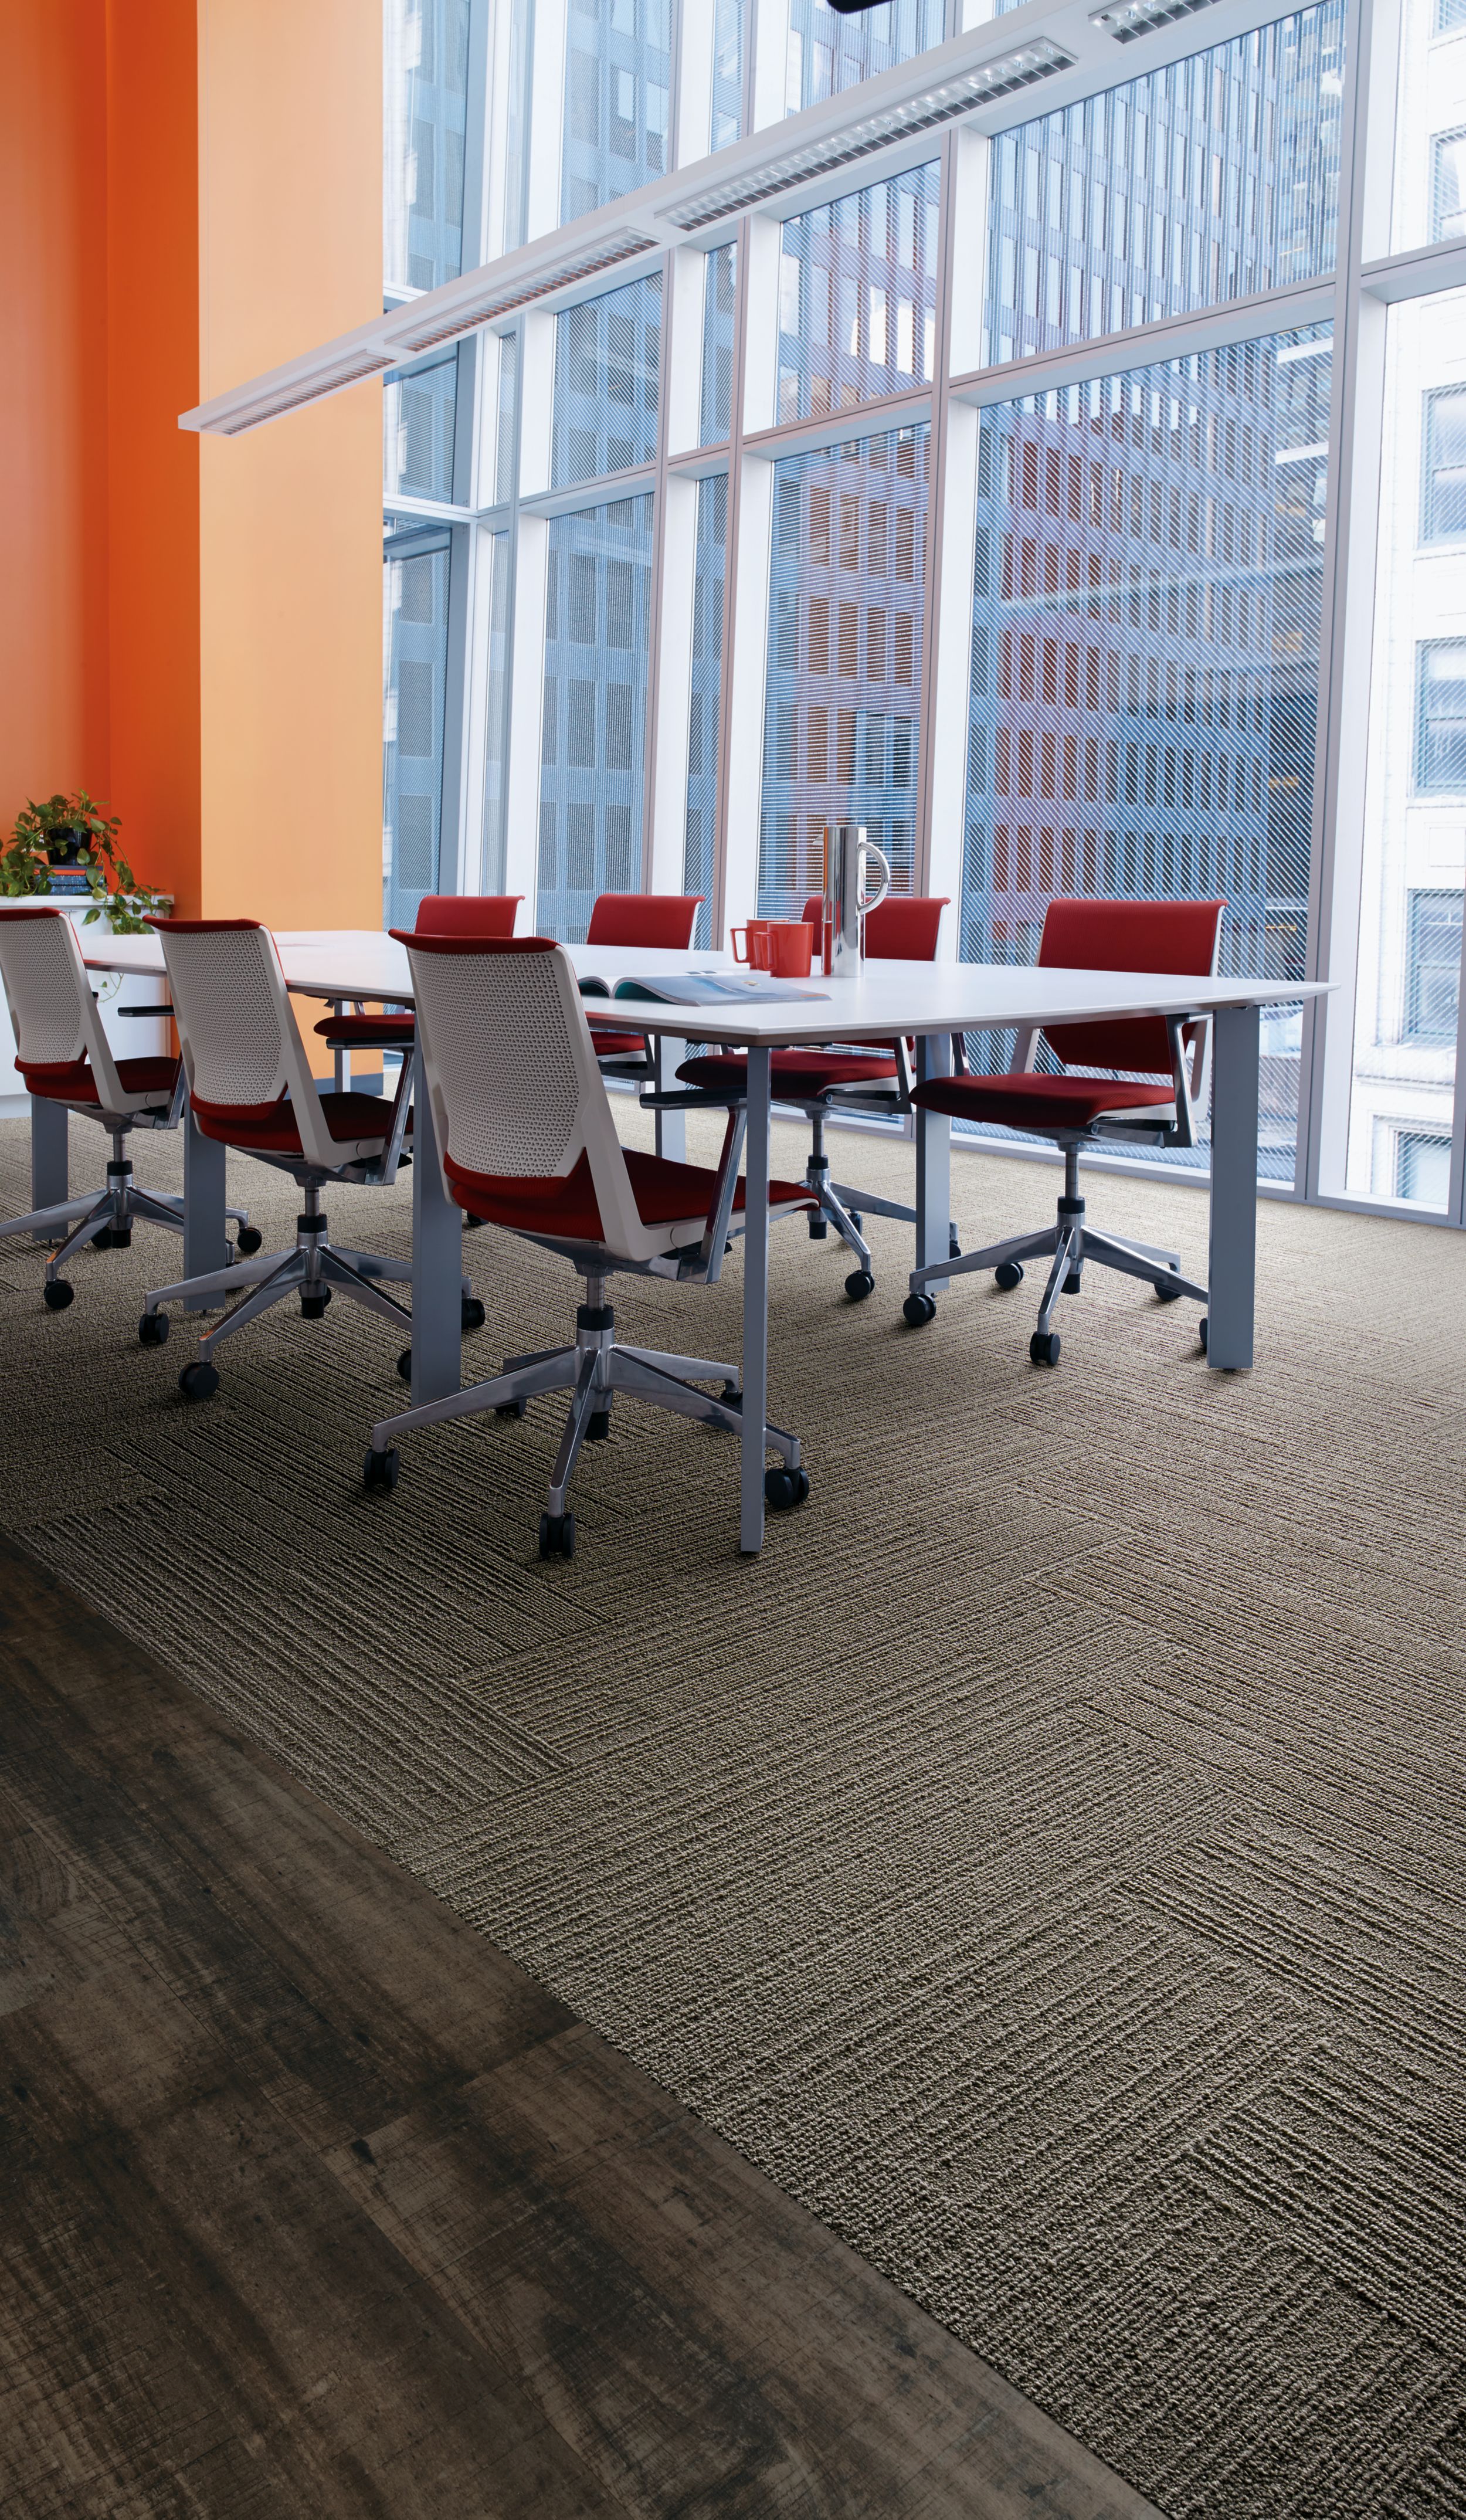 image Interface On Line plank carpet tile in meeting room with orange wall and red chairs numéro 12